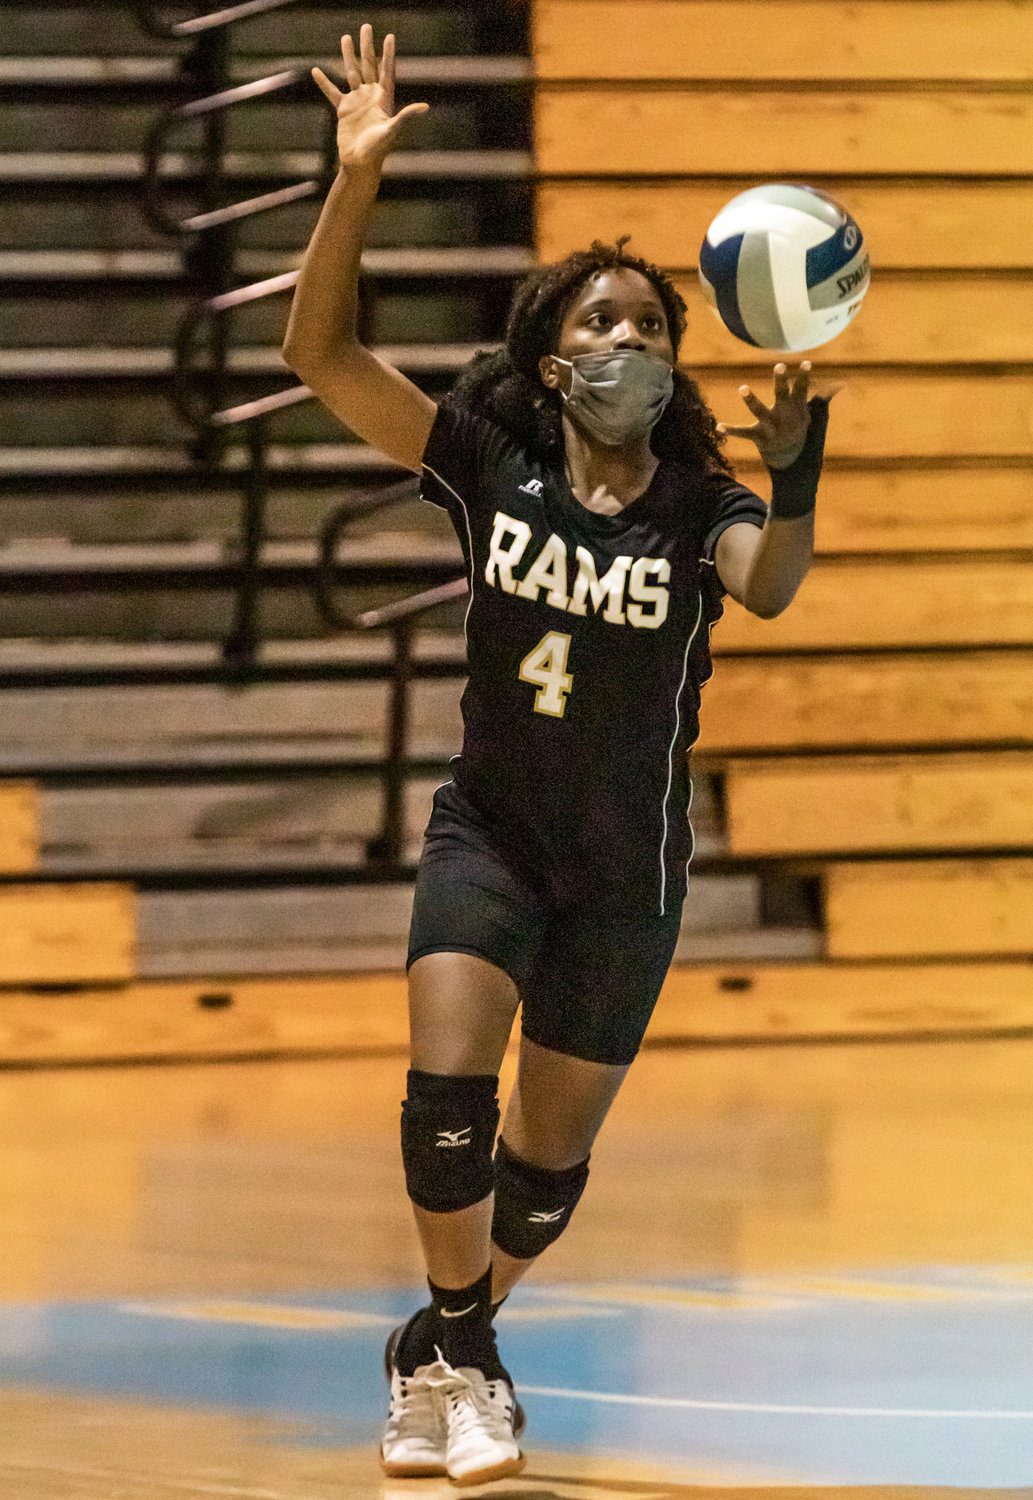 Junior Gloria Guerrier helped the Rams to a tremendous season that ended just one set away from a county title.